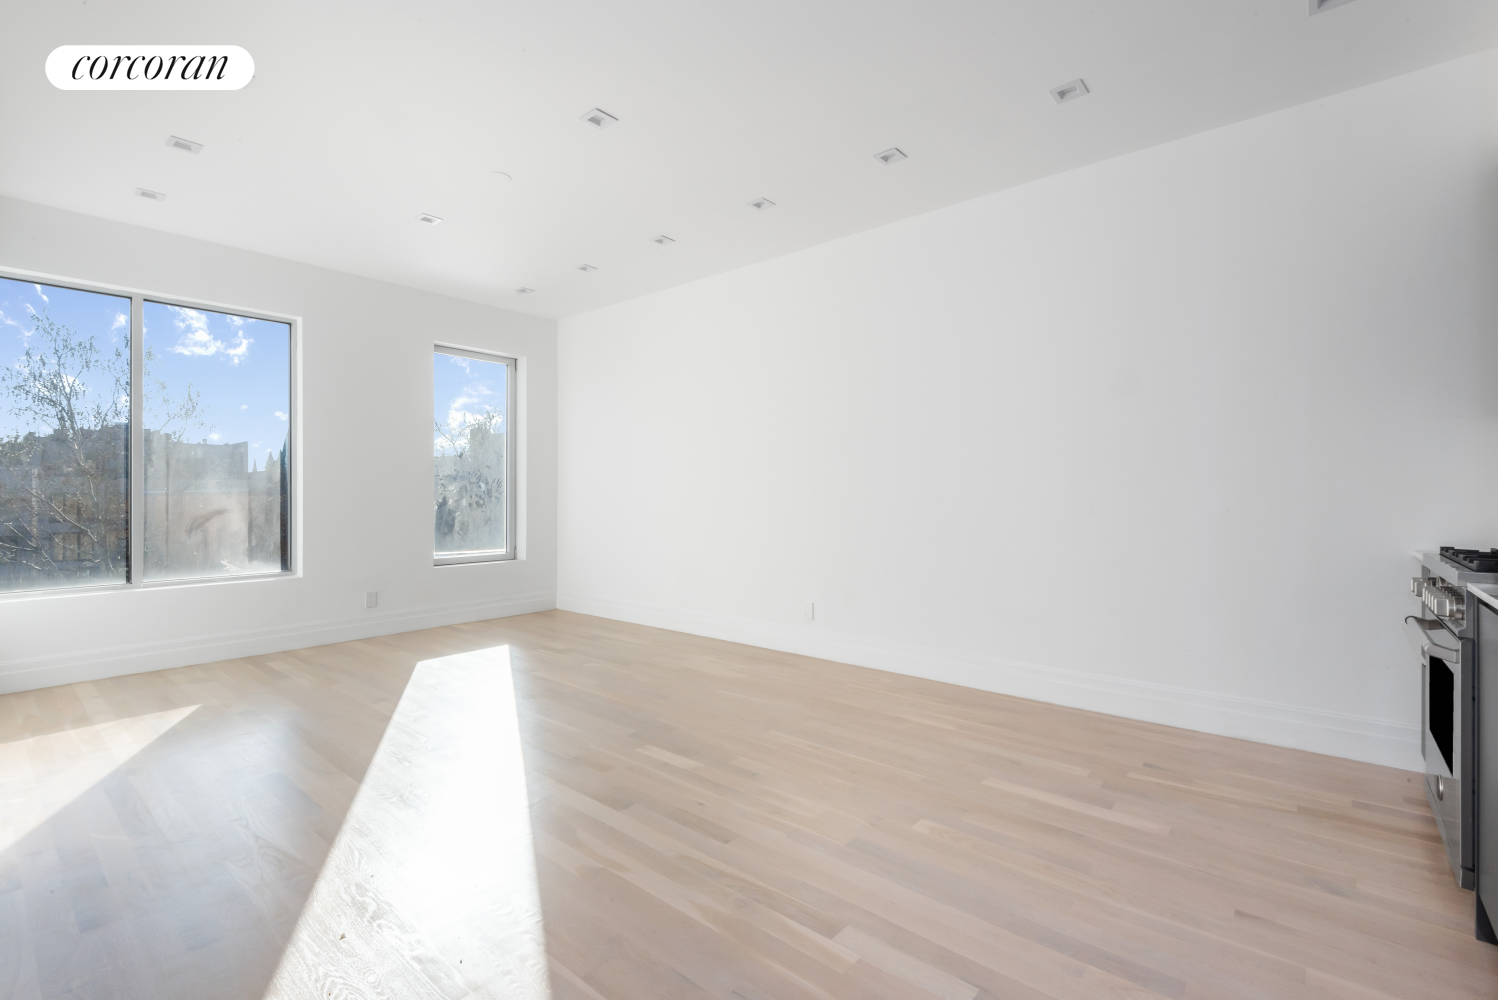 149 Dupont Street 4, Greenpoint, Brooklyn, New York - 3 Bedrooms  
2 Bathrooms  
5 Rooms - 